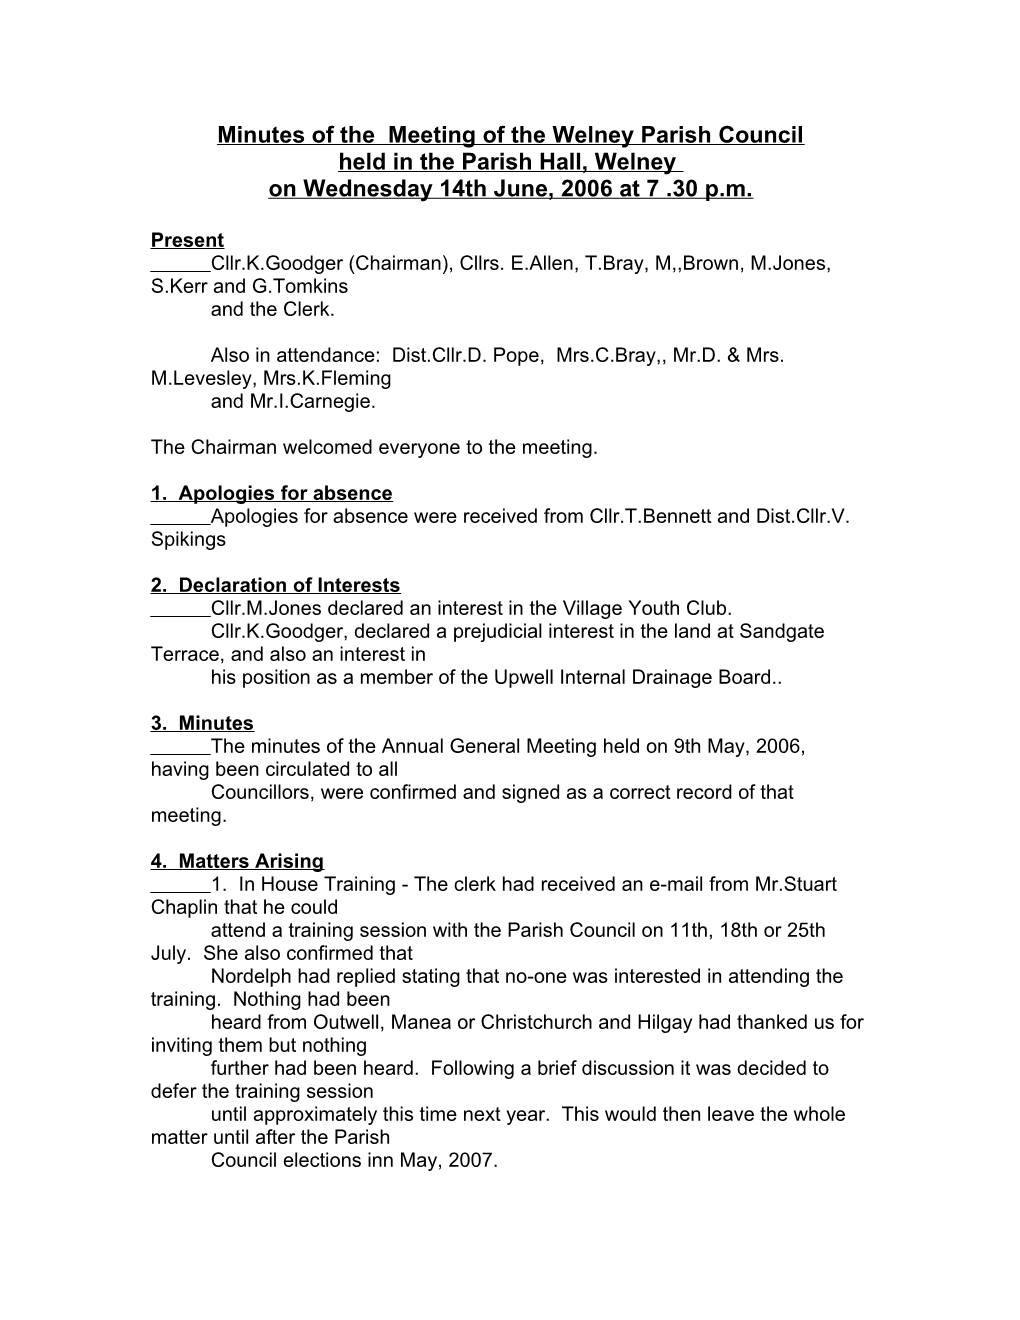 Minutes of the Meeting of the Welney Parish Council s1